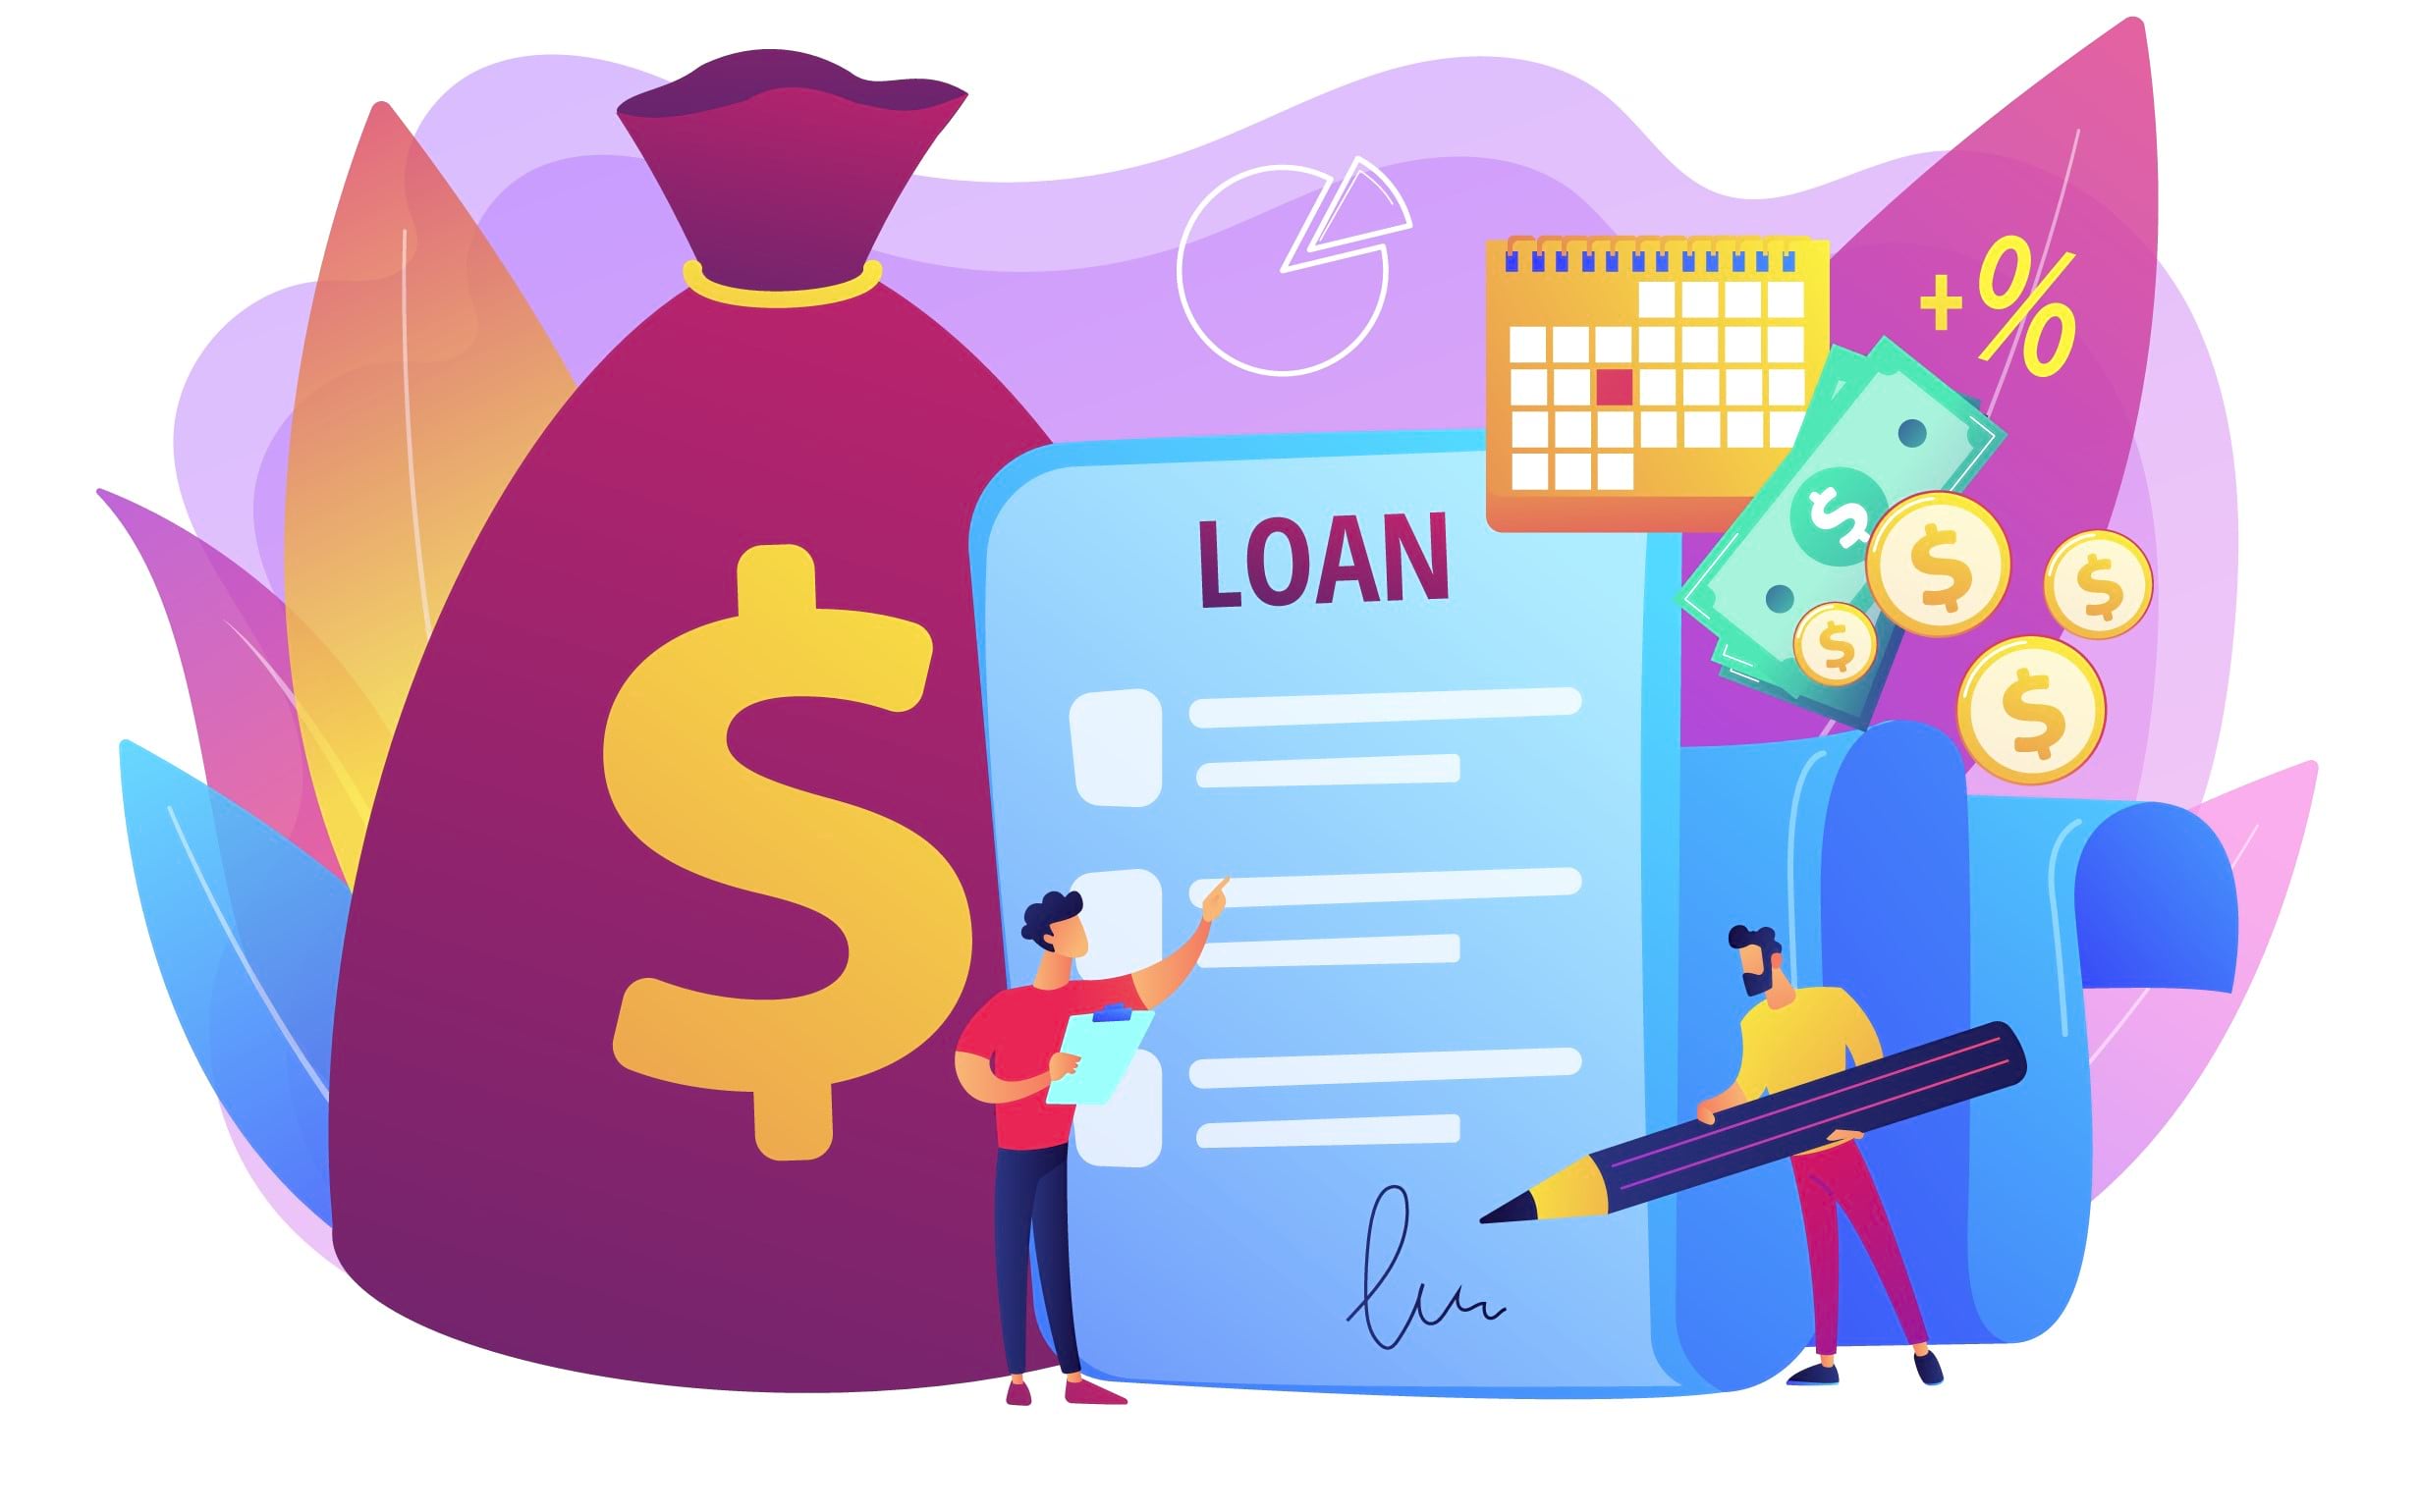 Types of Loans: Personal, Student, Home, Auto & More